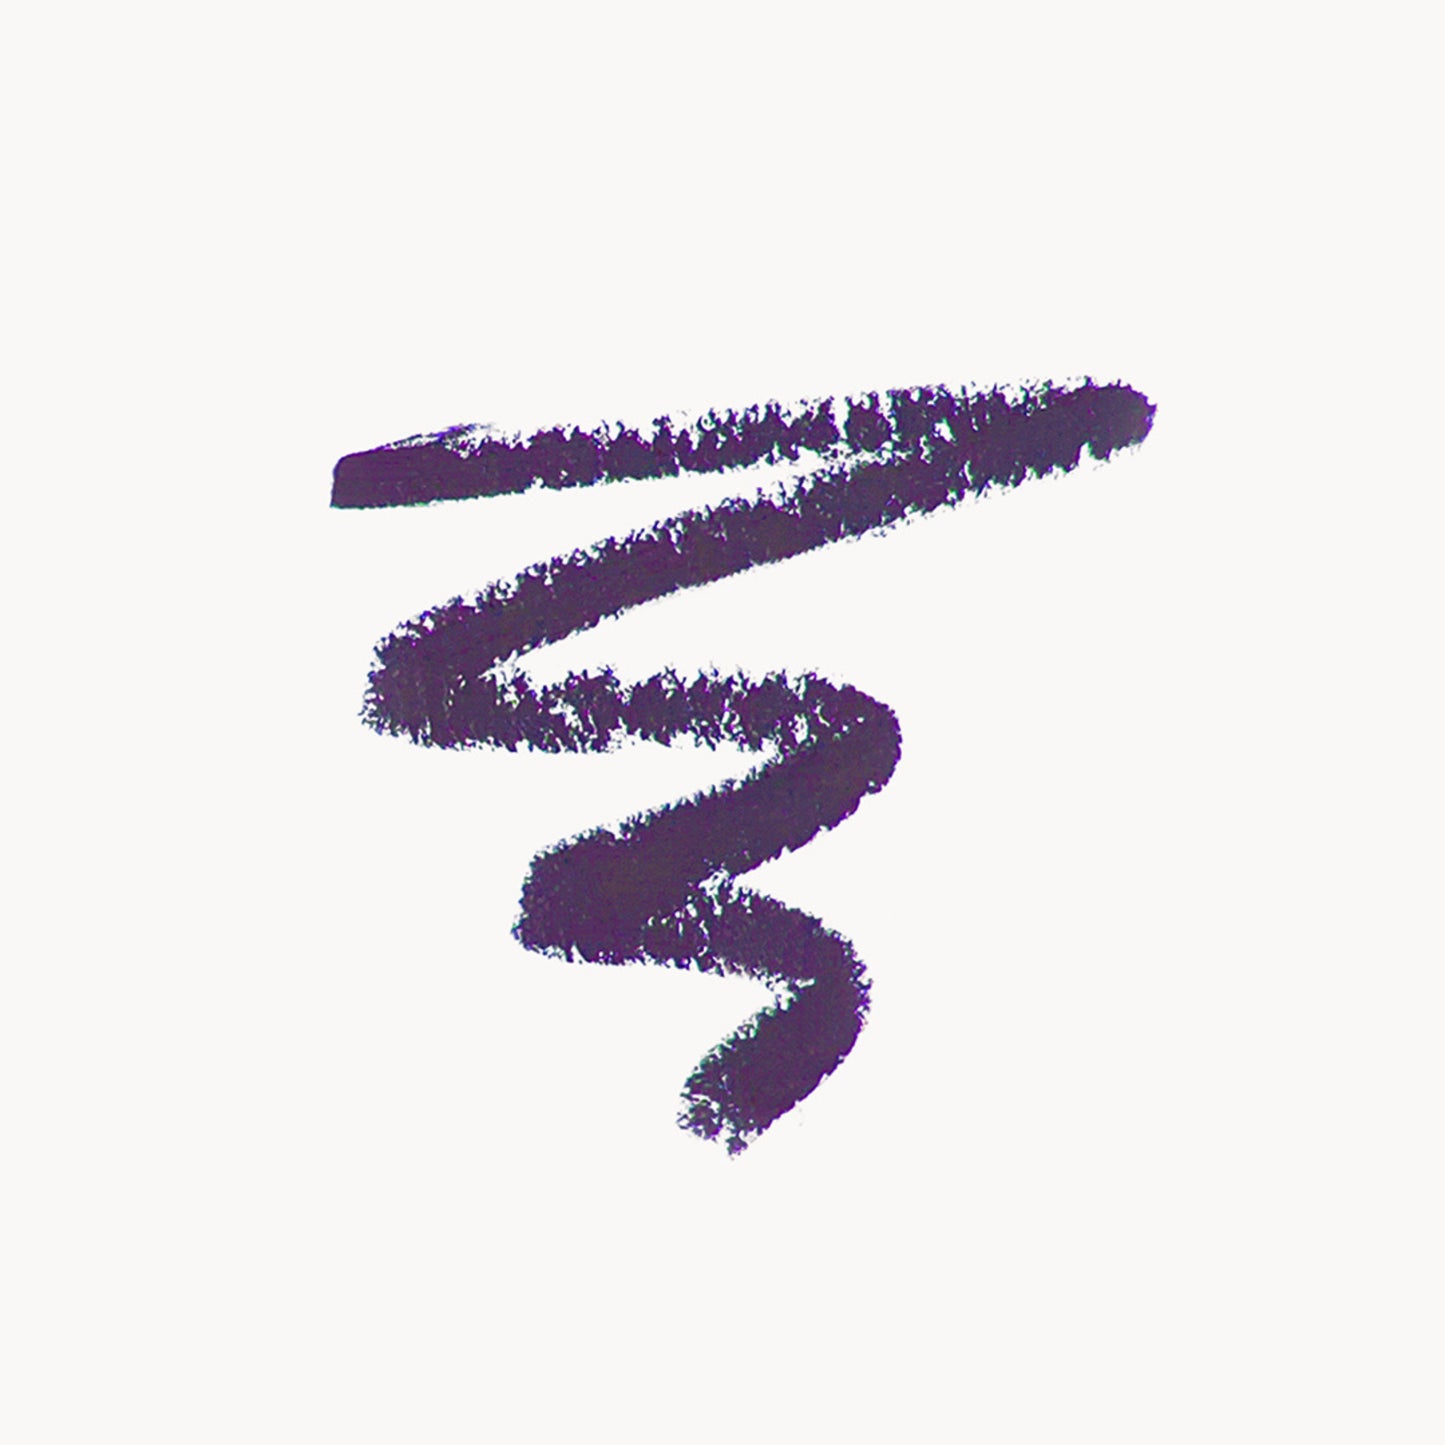 A thick deep purple scribble on a white background